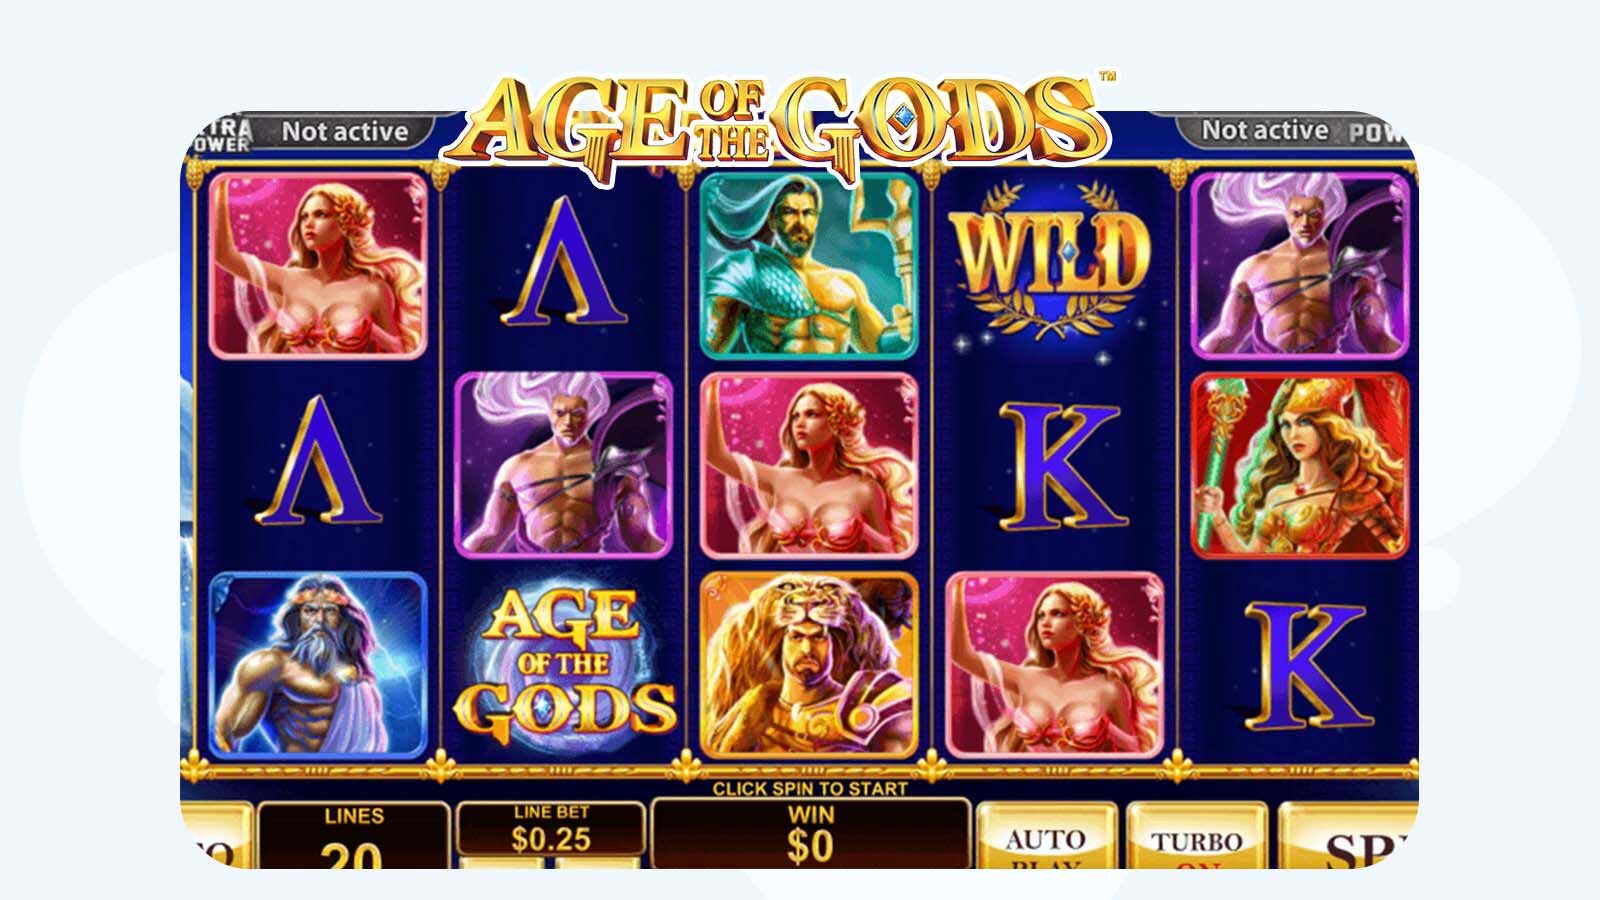 Age of the Gods: Why It’s One of the Top Online Pokies